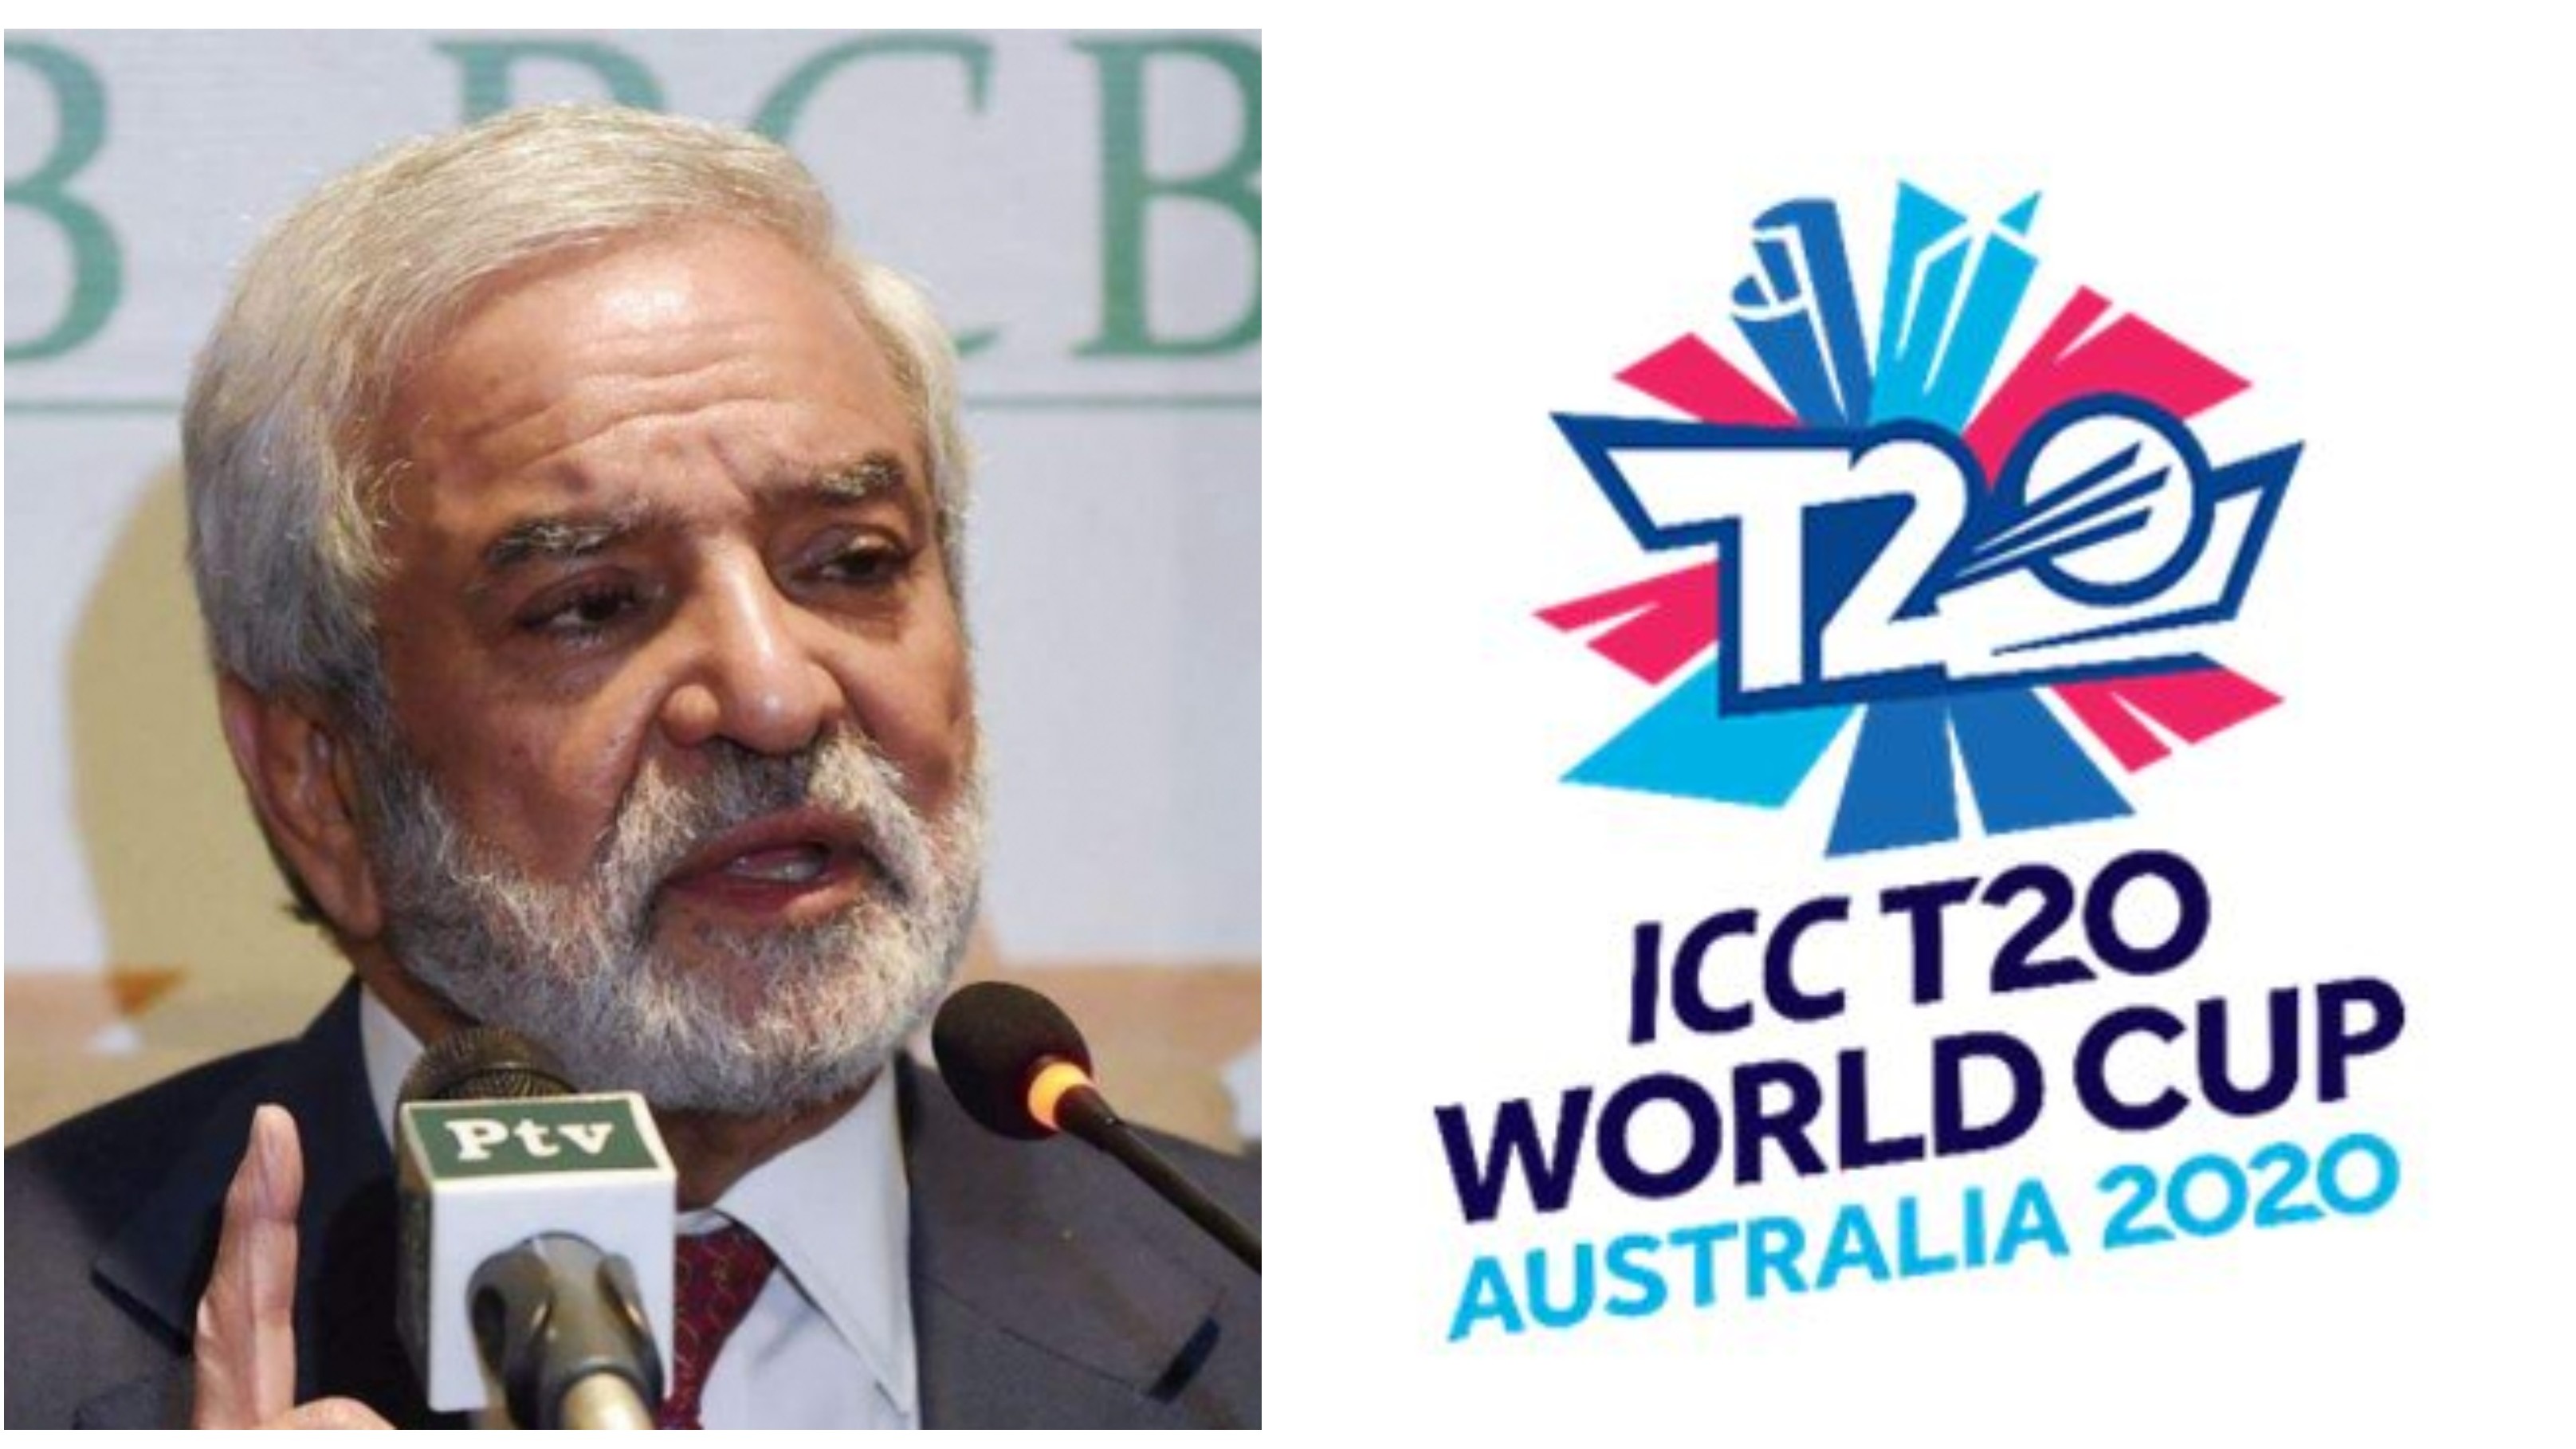 PCB chief Ehsan Mani says T20 World Cup 